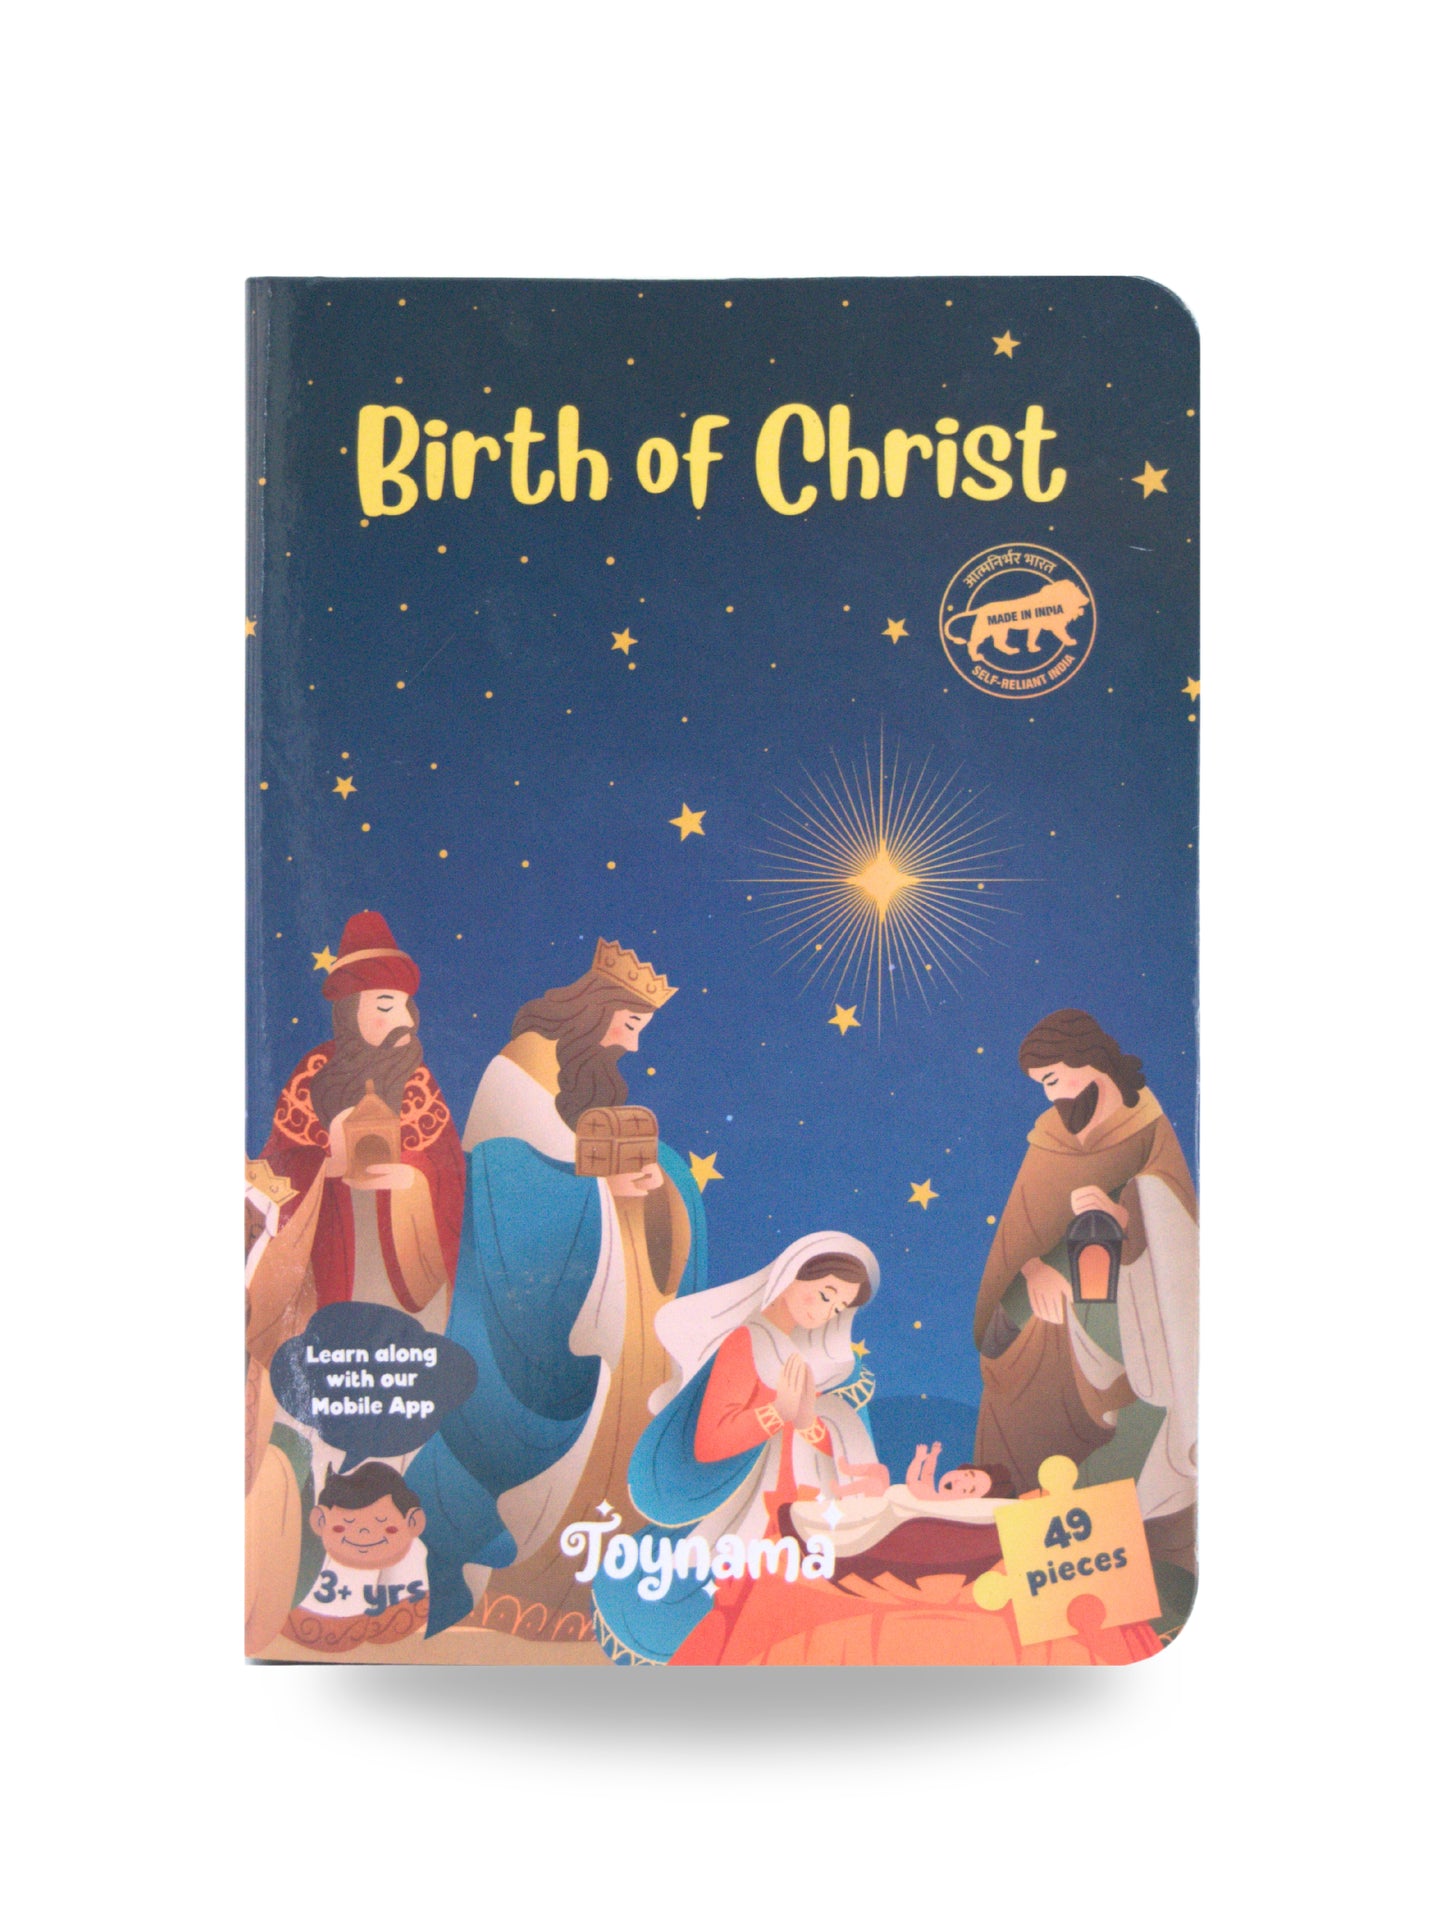 Birth of Christ 49 Pcs Jigsaw Puzzles Ages 3+